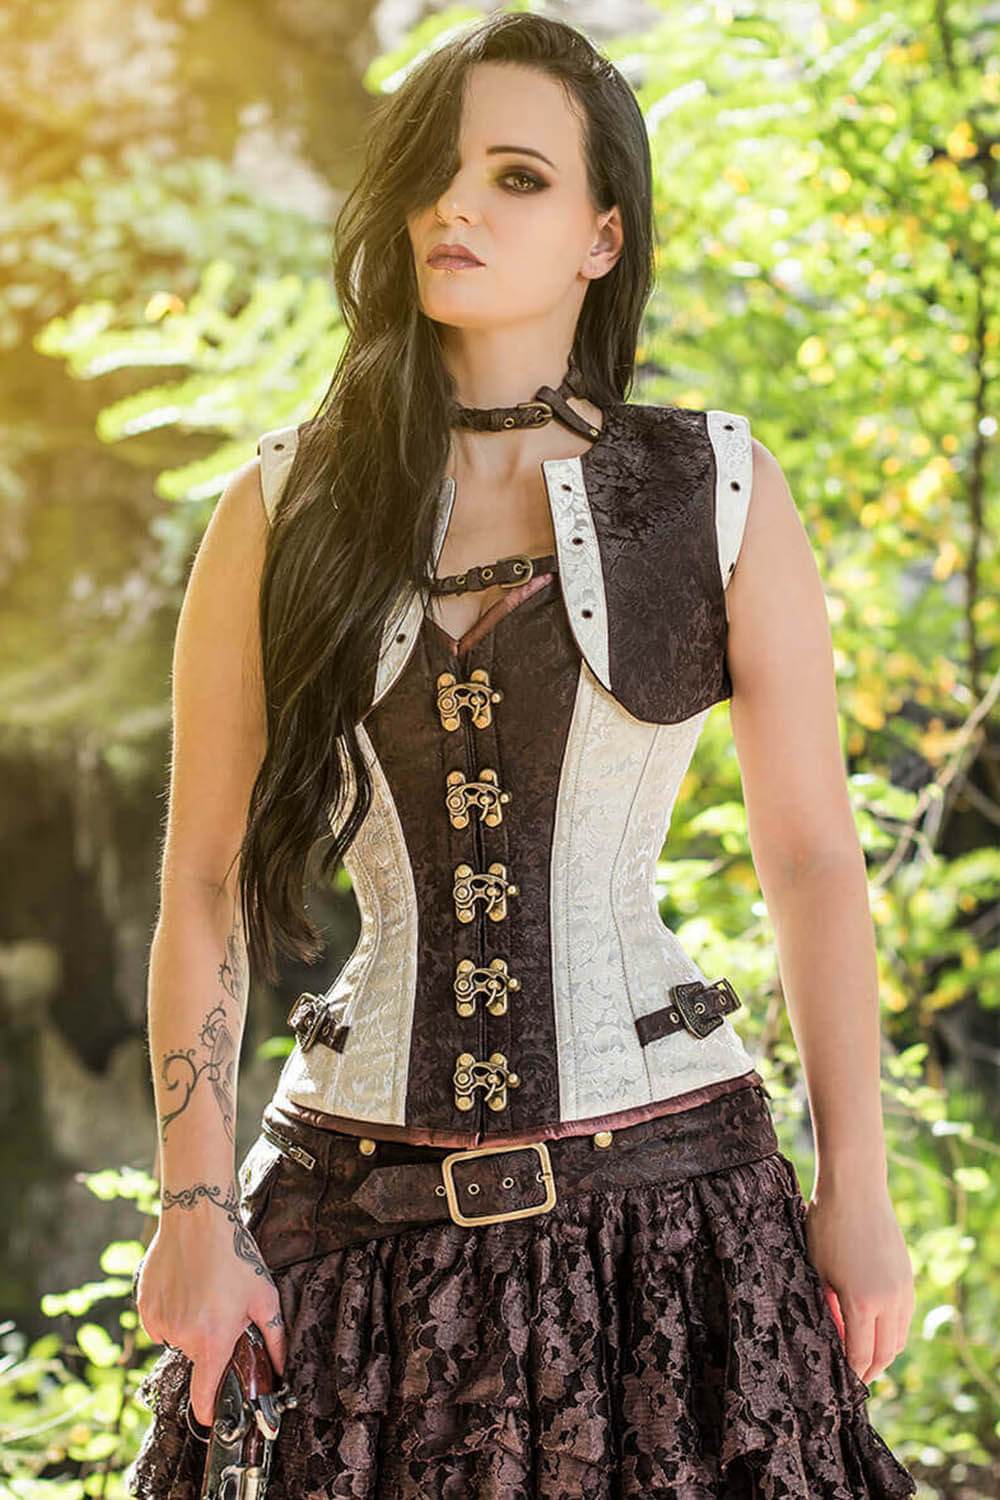 Shop our Steampunk Style, Bespoke Corset, Save 35% on First Order